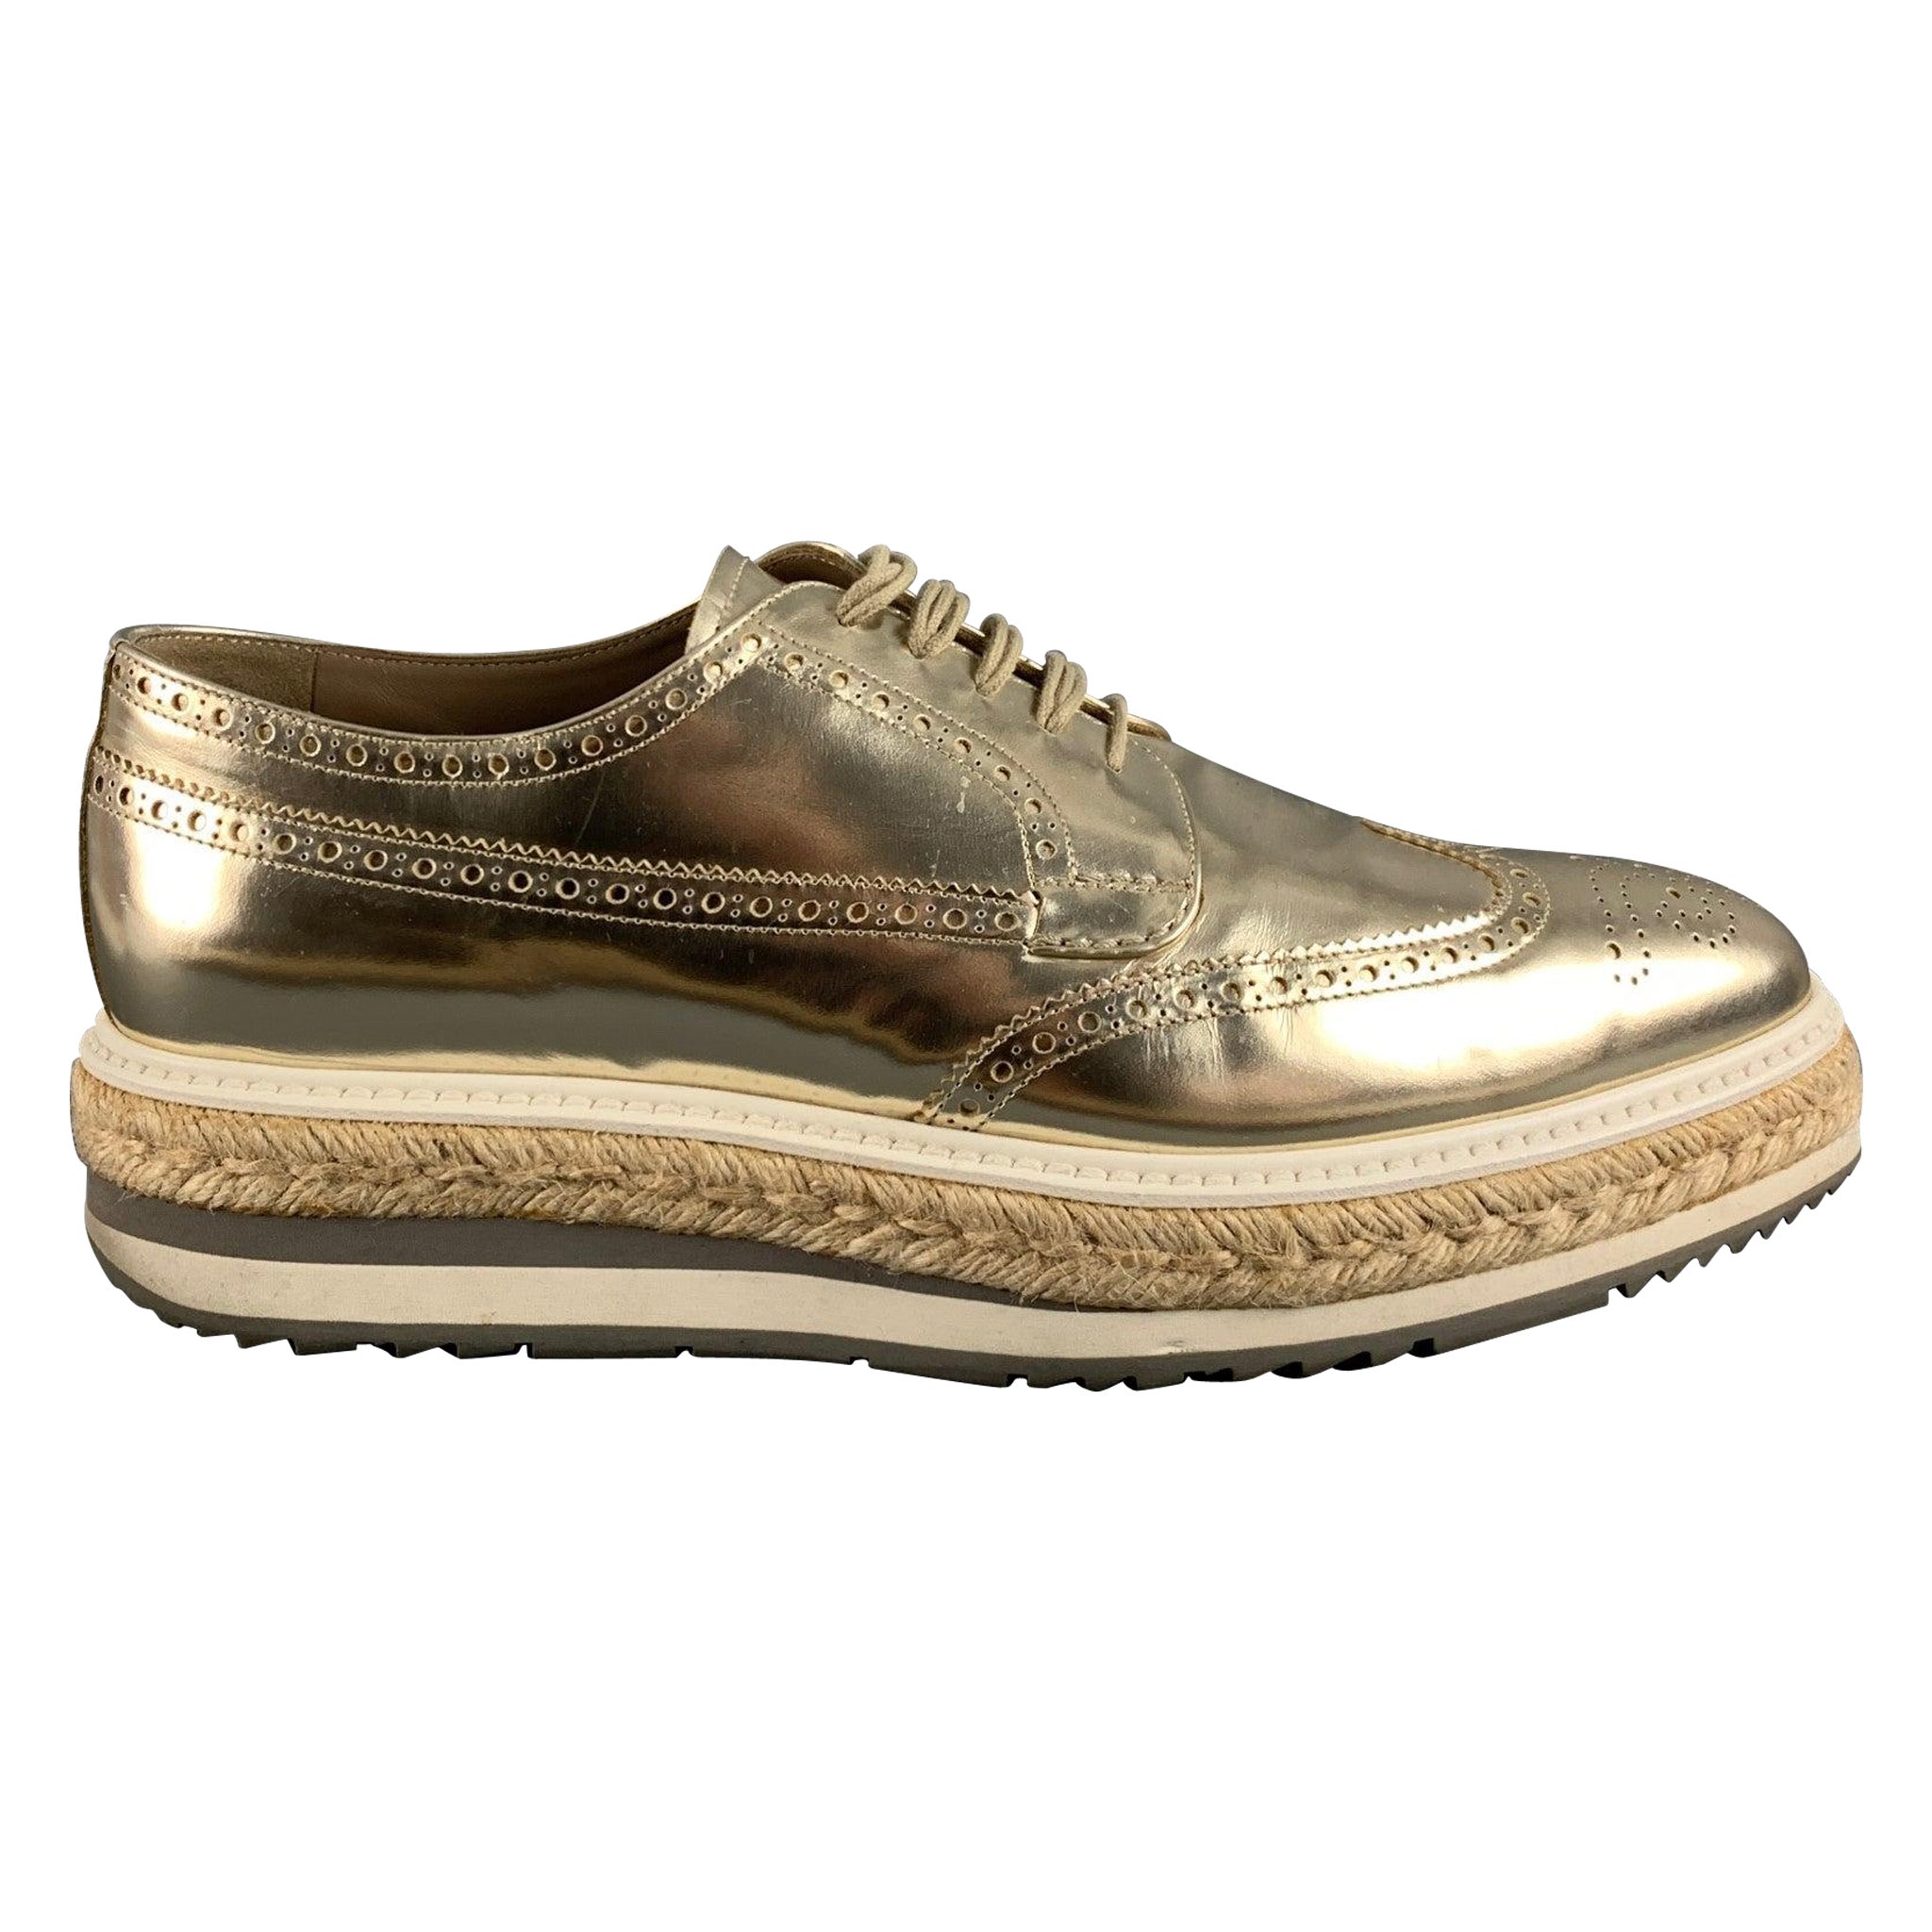 PRADA Size 10 Gold Perforated Leather Platform Lace Up Shoes For Sale